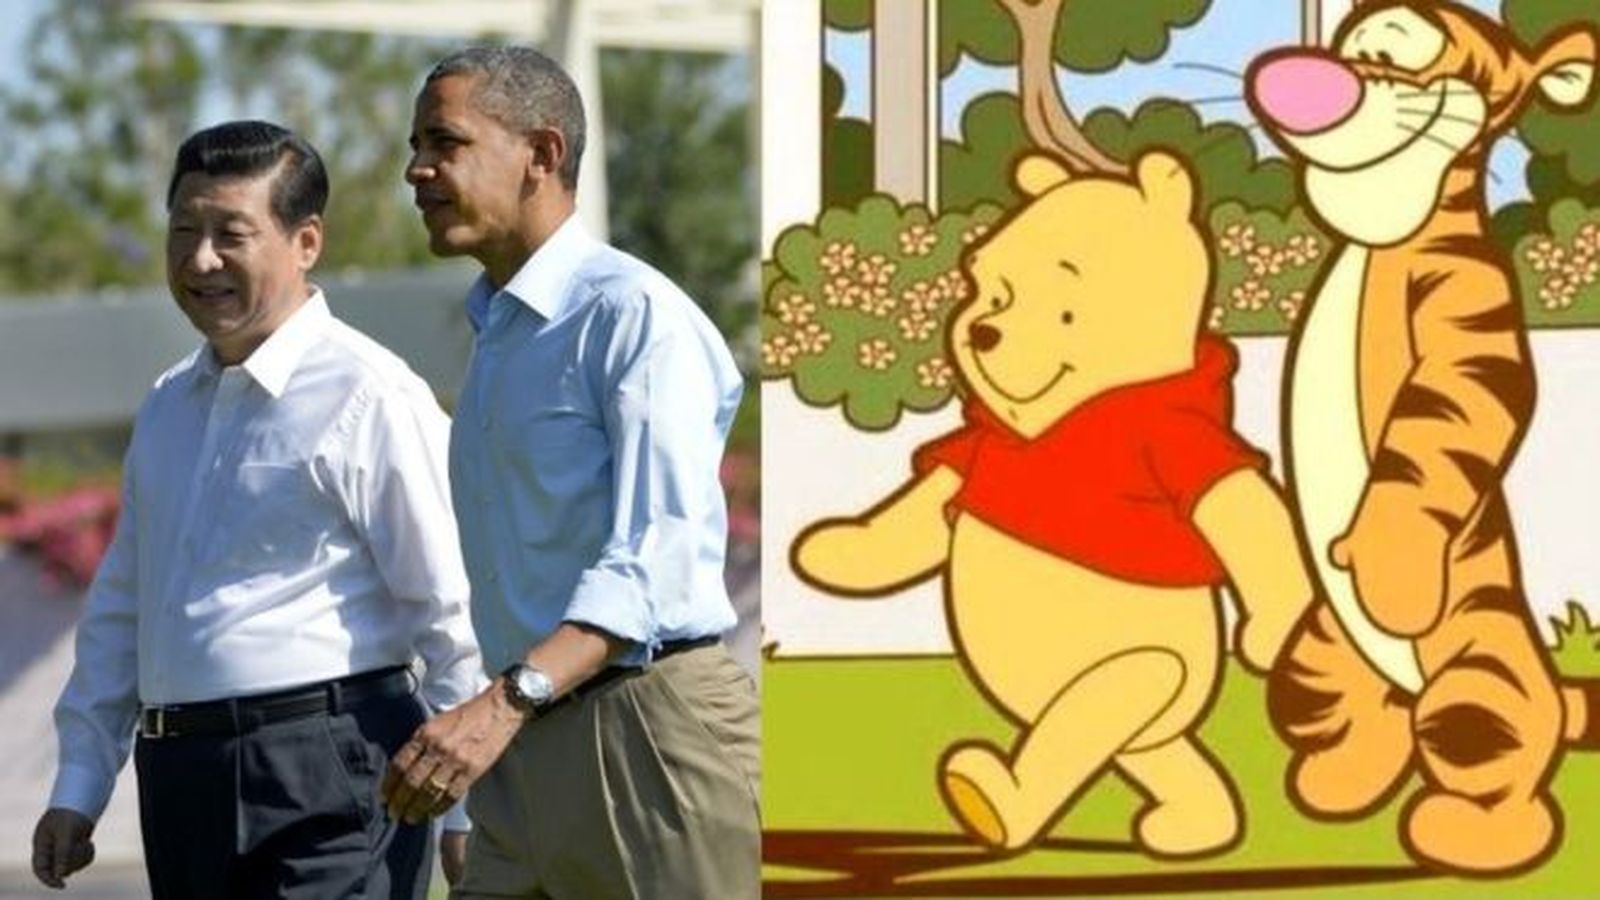 A long-running meme compares President Xi Jinping and President Barack Obama with Pooh and Tigger. (Picture on right: Xinhua)